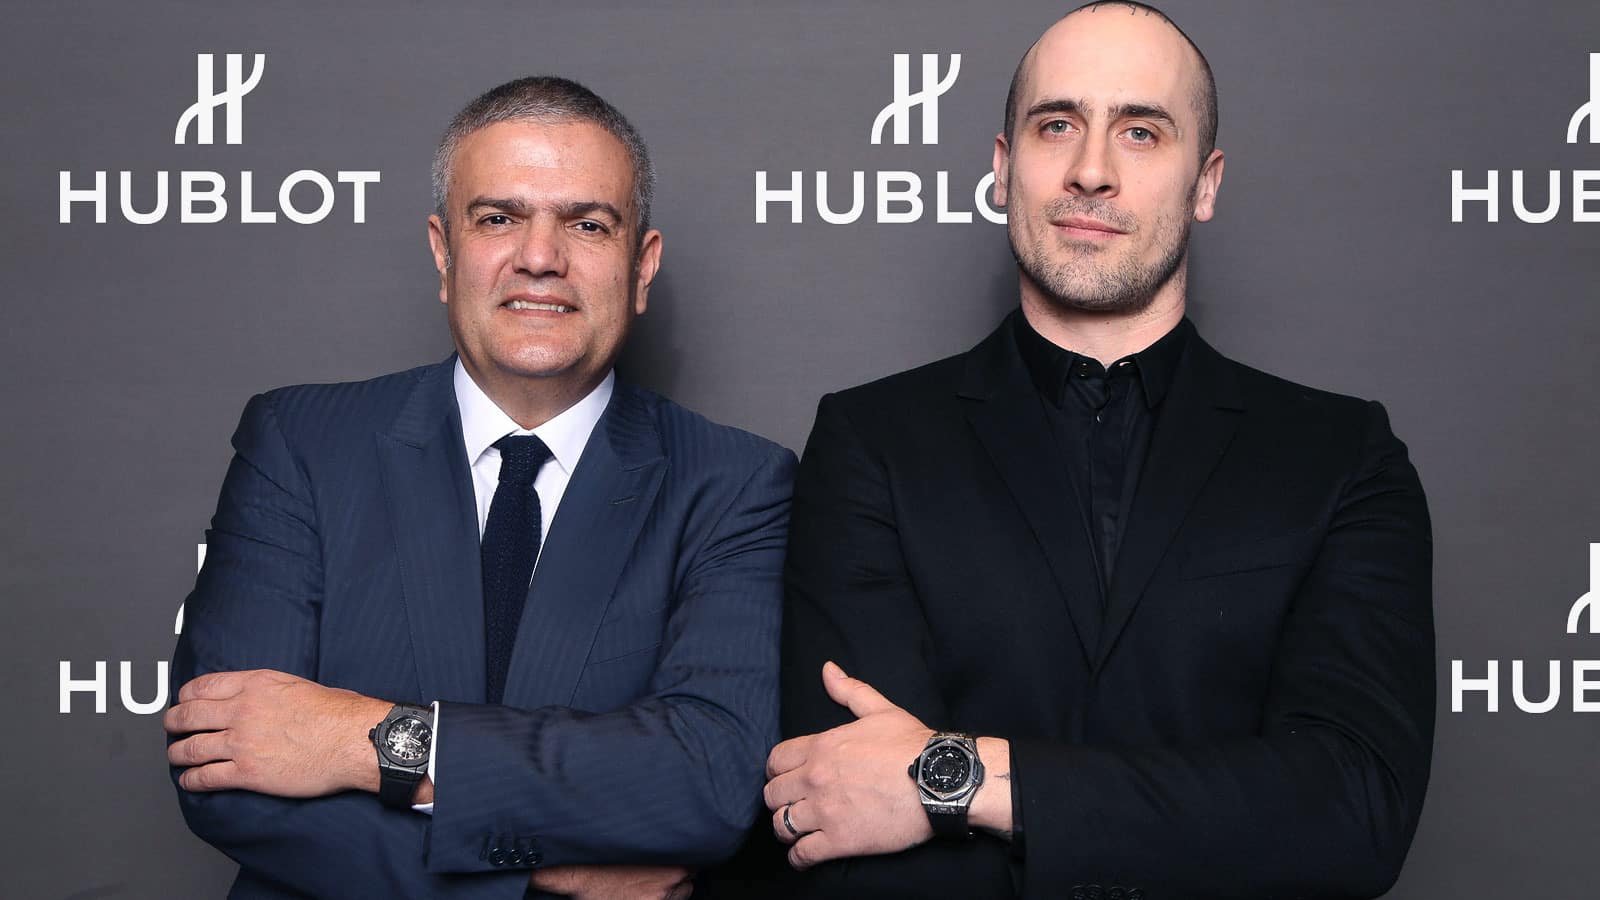 Hublot Unveils a Pop-Up Tattoo Shop in Miami with Sang Bleu's Maxime Büchi  - Daily Front Row